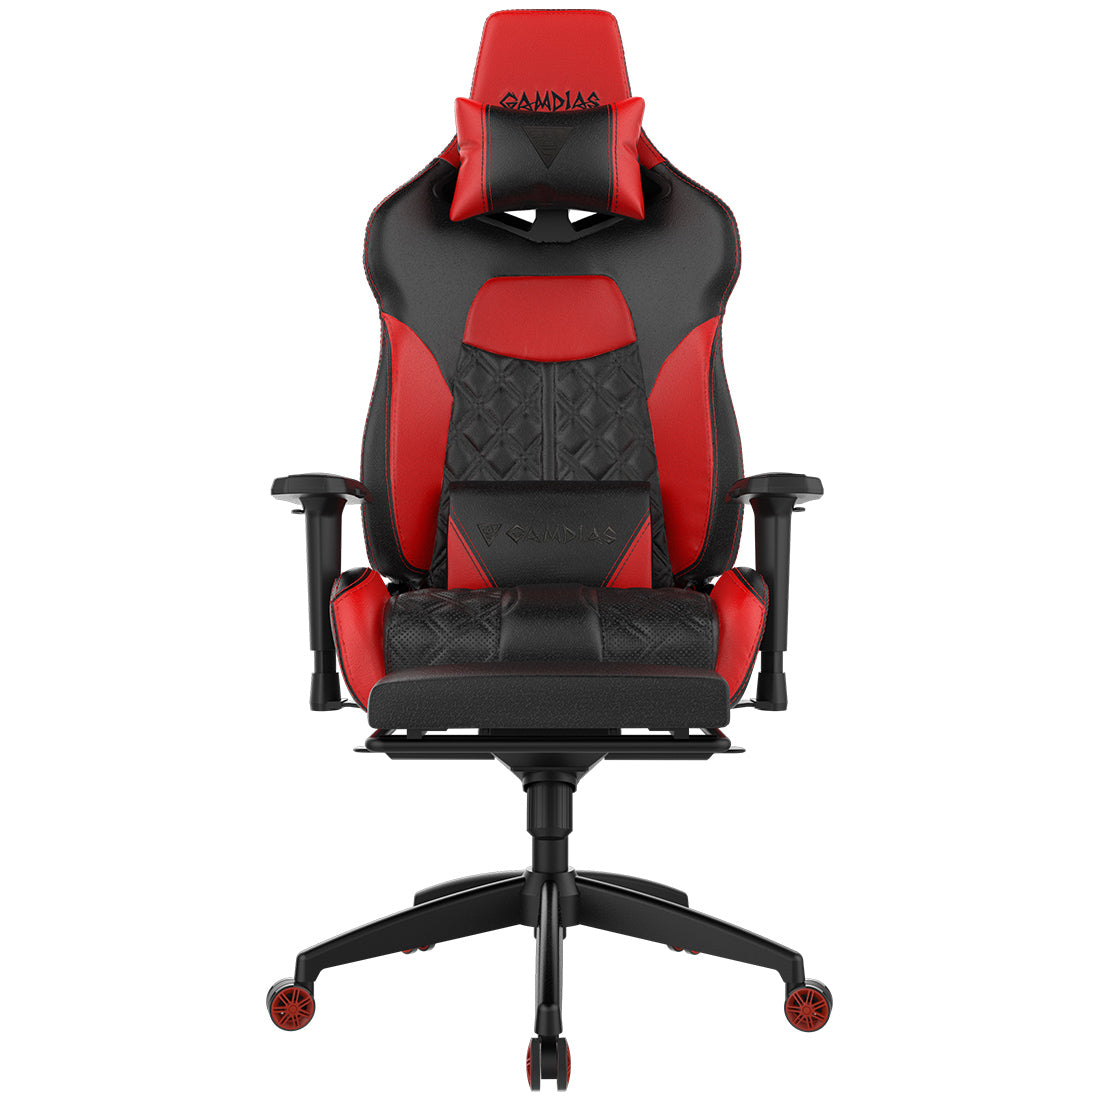 Gamdias Achilles P1 L RGB Gaming Chair with Customizable Lighting and 150° Adjustable Backrest